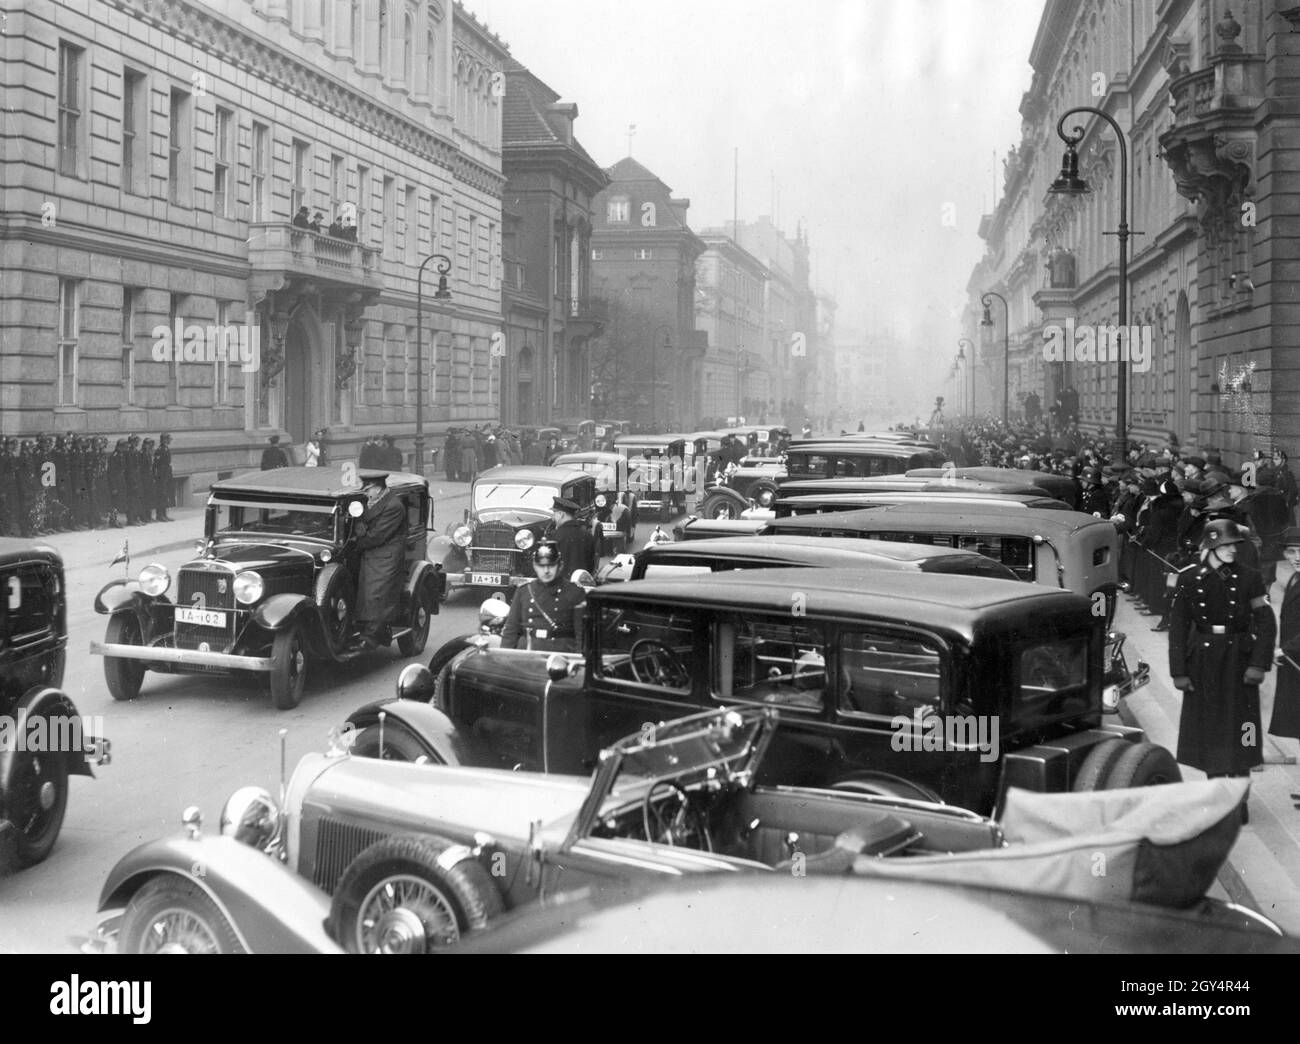 Adolf Hitler met with diplomats for a New Year's reception at the Palais des Reichspräsidenten (center left) on Wilhelmstraße in Berlin-Mitte in early January 1937. The photograph shows the cars being driven away close behind each other after the diplomats have disembarked, watched by numerous spectators and members of the Leibstandarte SS Adolf Hitler. To the left is the Kellner Palace (part of the Foreign Office), to the right of the Reich President's Palace is the Reich Ministry of Food and Agriculture. [automated translation] Stock Photo